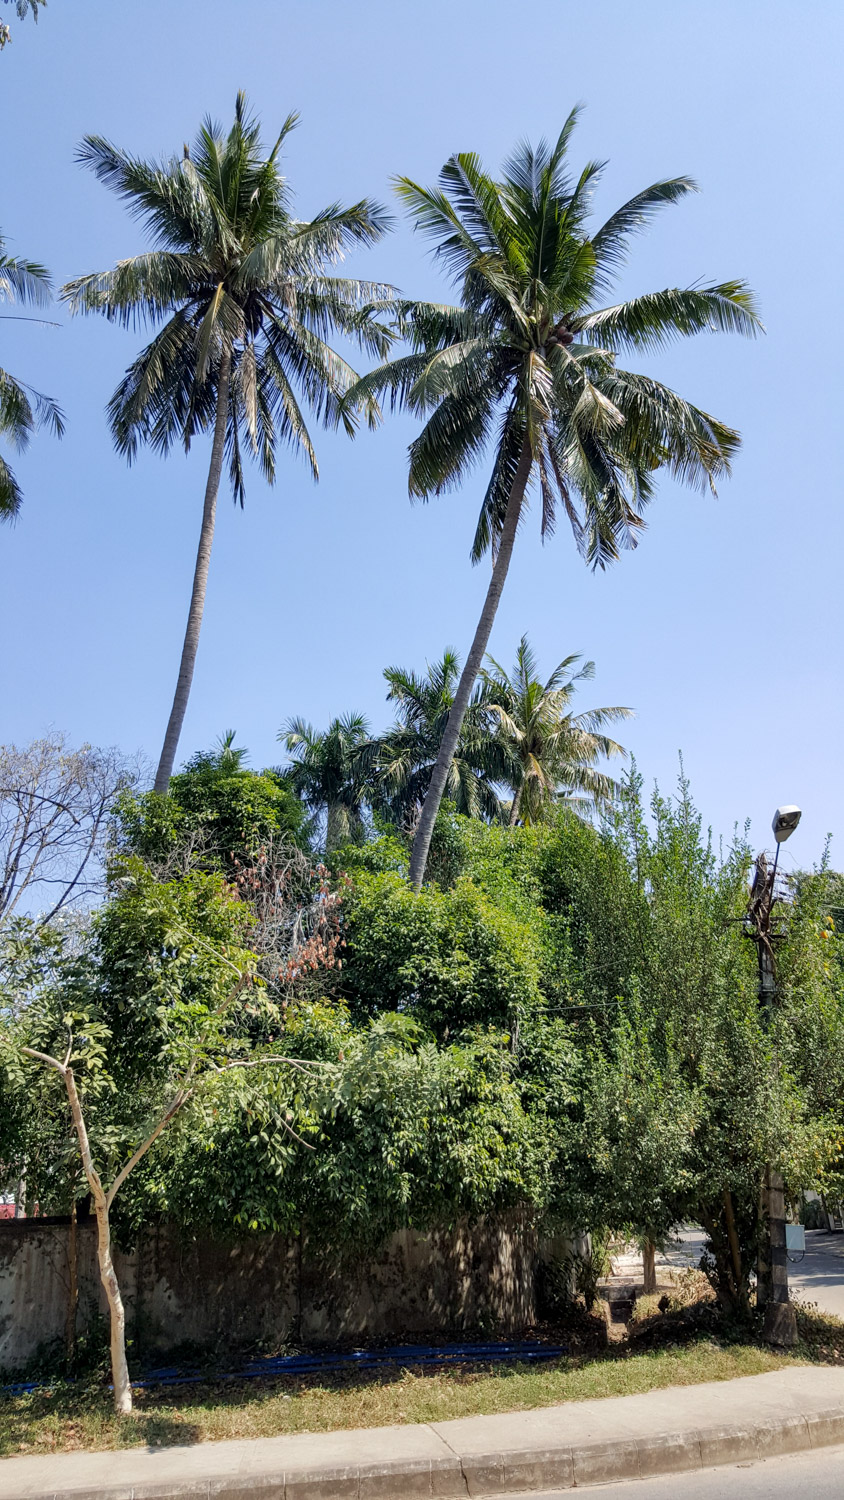 When you think about how tall coconut palms are, the whole "watch out for falling coconuts" thing really starts to make sense.